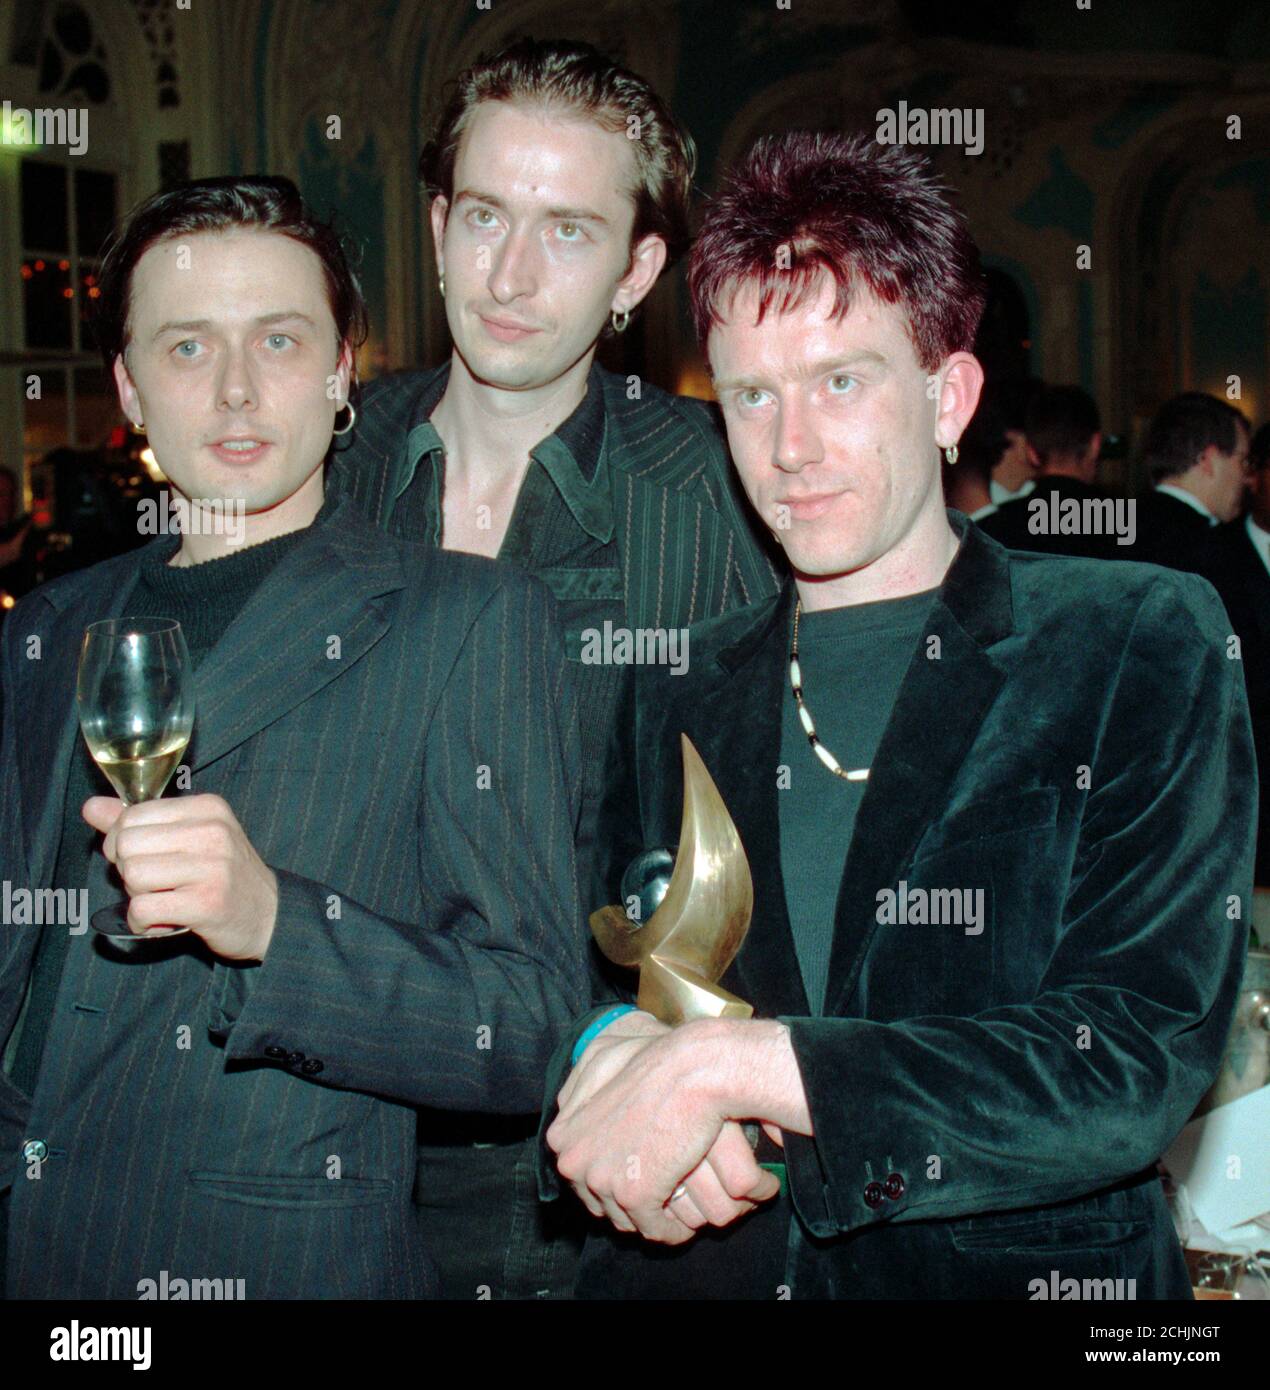 Three members of the pop group Suede after being awarded the Mercury Music Prize. (L-R) Lead singer Brett Anderson, bassist Mat Osman and drummer Simon Gilbert. Stock Photo